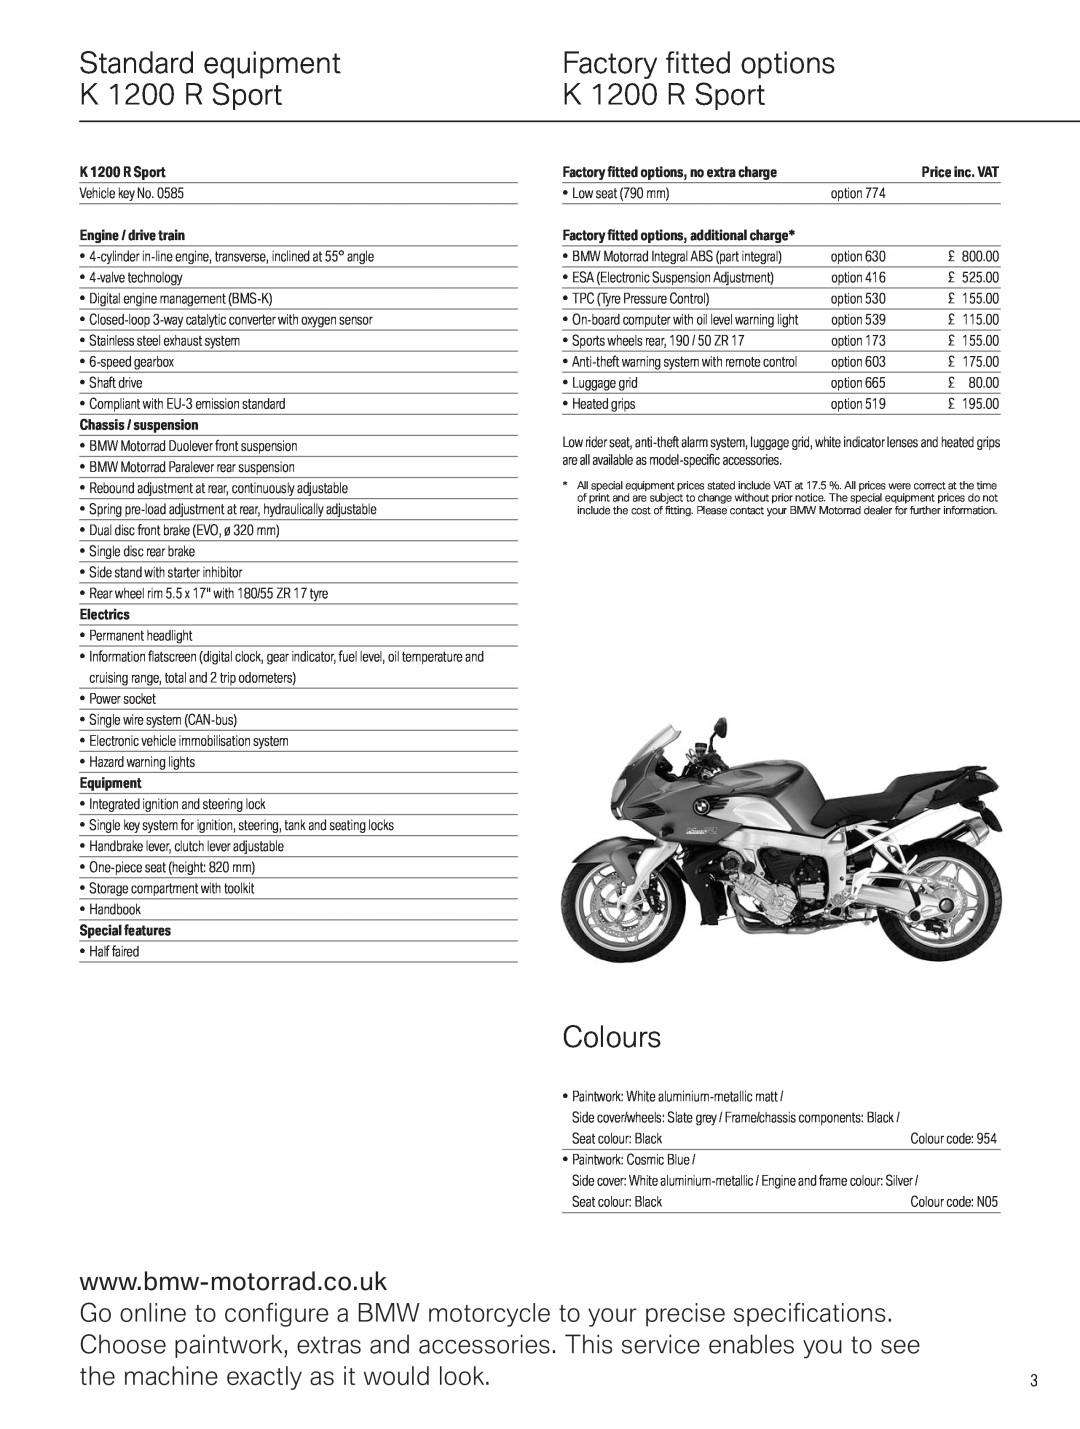 BMW K 1200 S Standard equipment, Factory fitted options, K 1200 R Sport, Colours, the machine exactly as it would look 